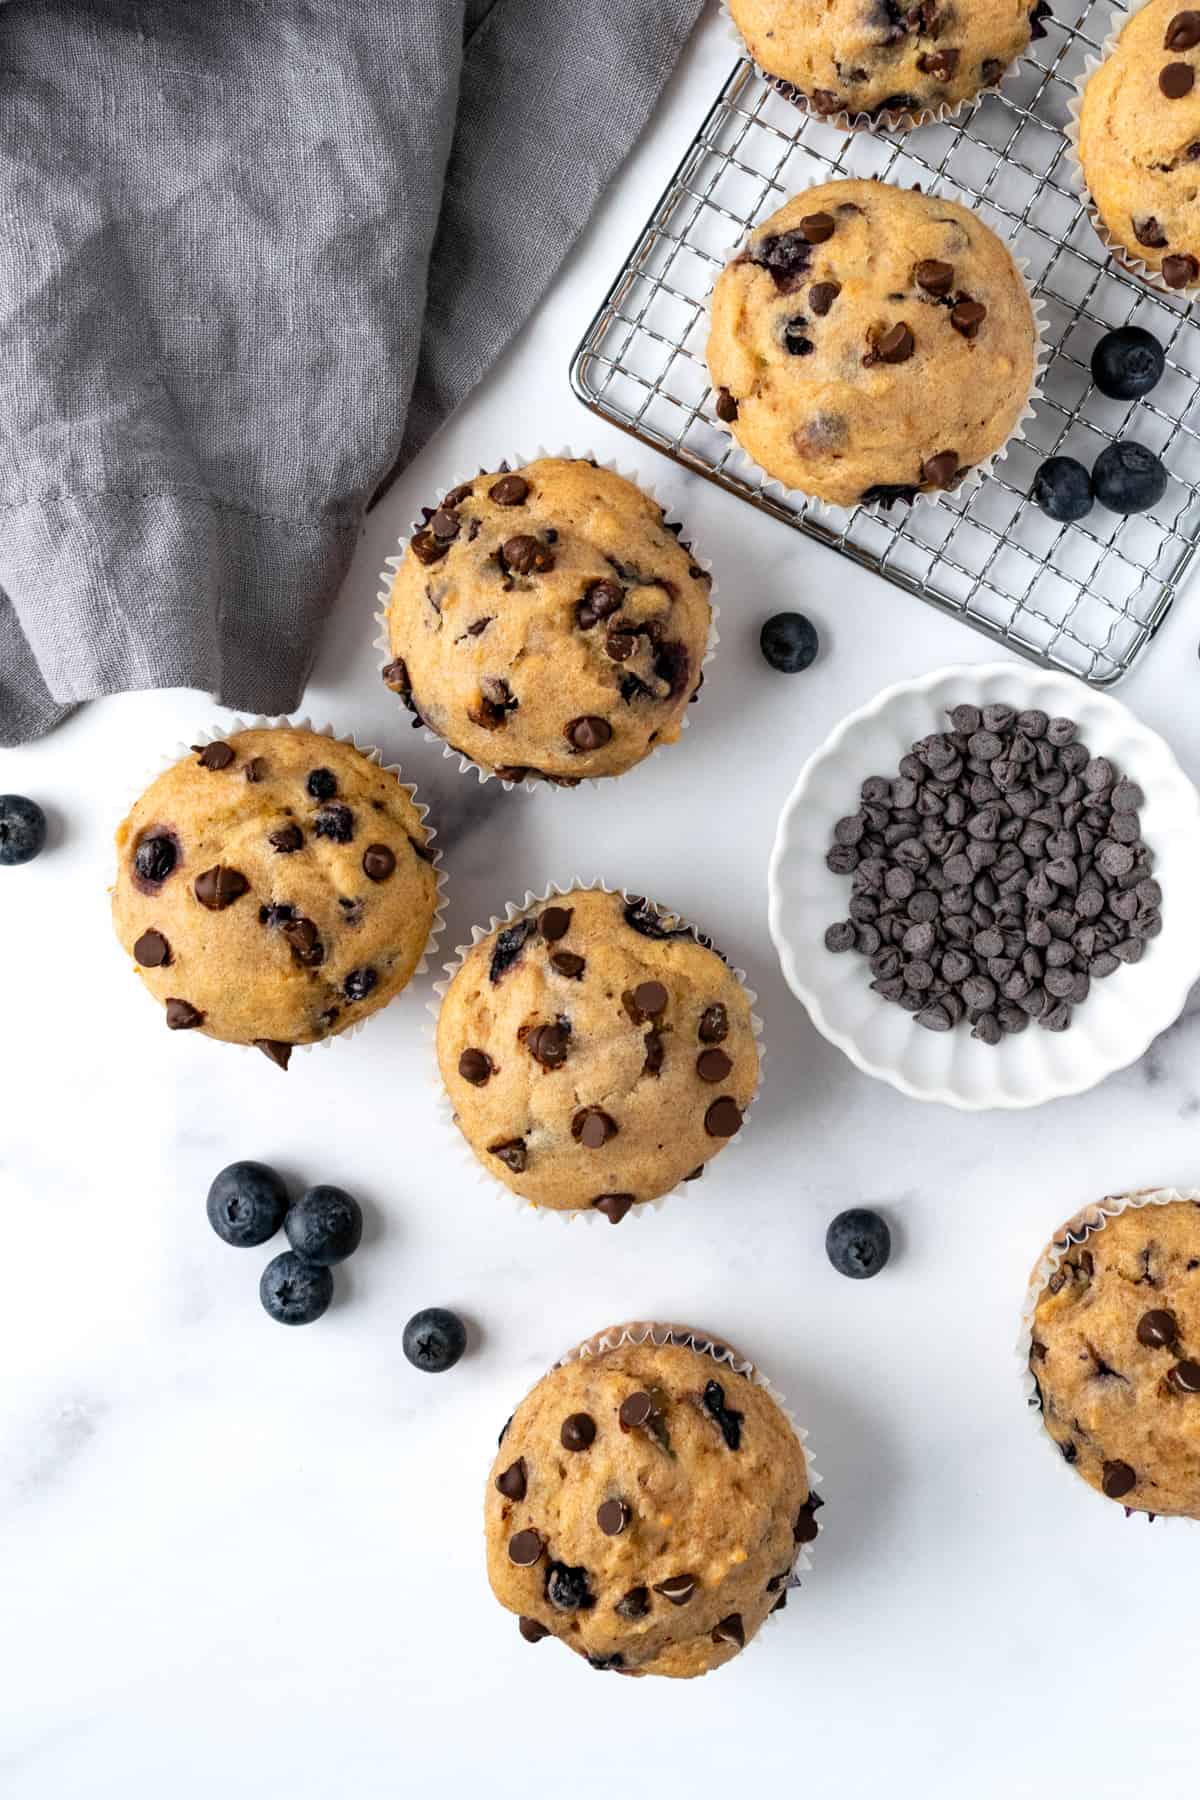 Chocolate Chip Blueberry Muffins on a marble countertop.